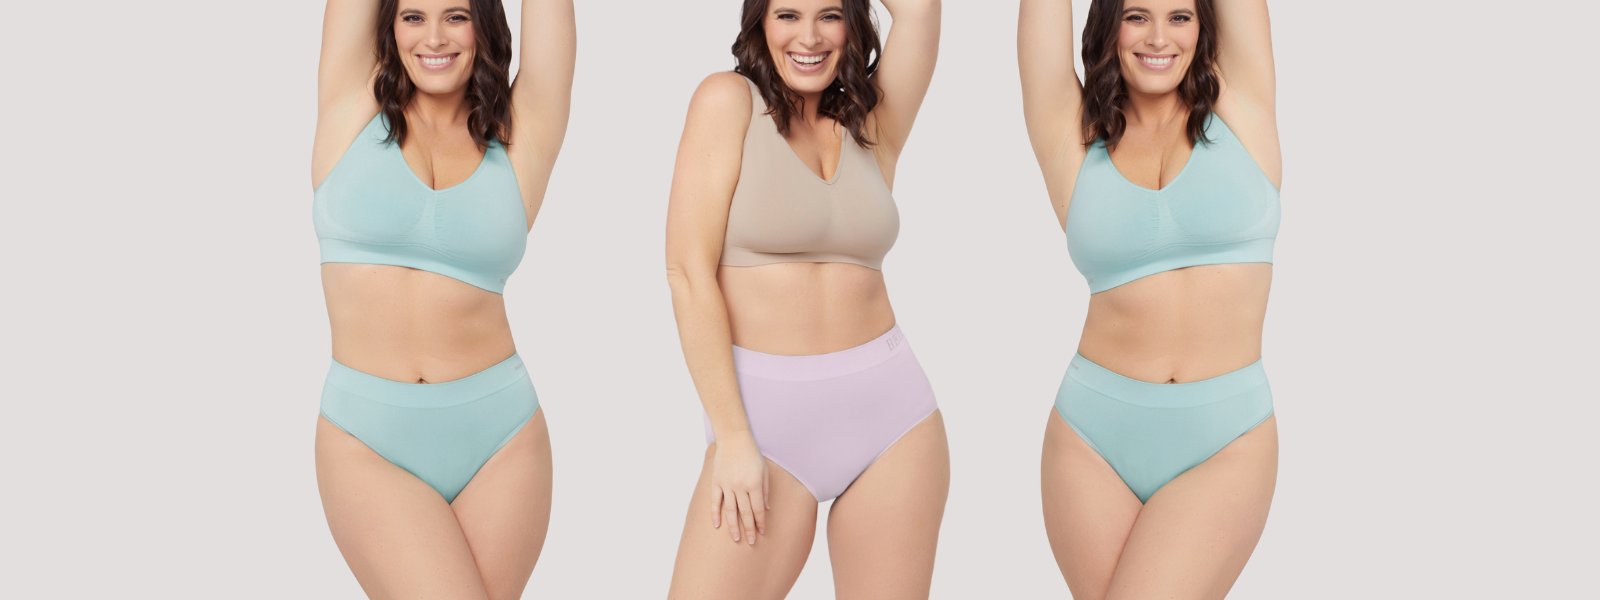 New underwear, wirefree bras, comfortable shapewear, breathable tops and pants | New Arrivals | Bella Bodies Latvia